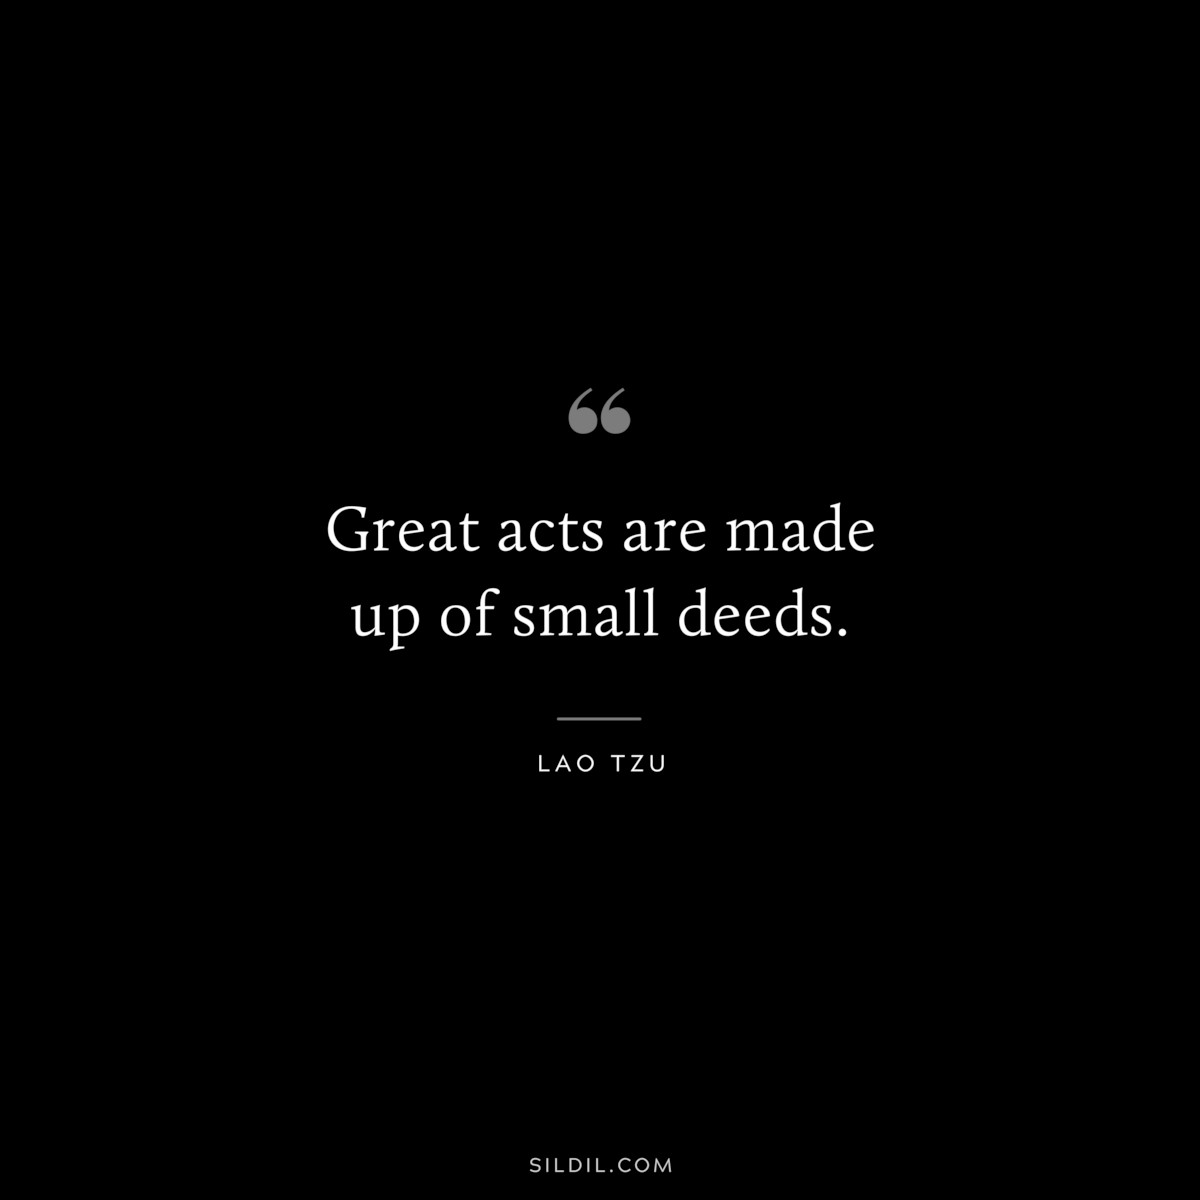 Great acts are made up of small deeds. ― Lao Tzu